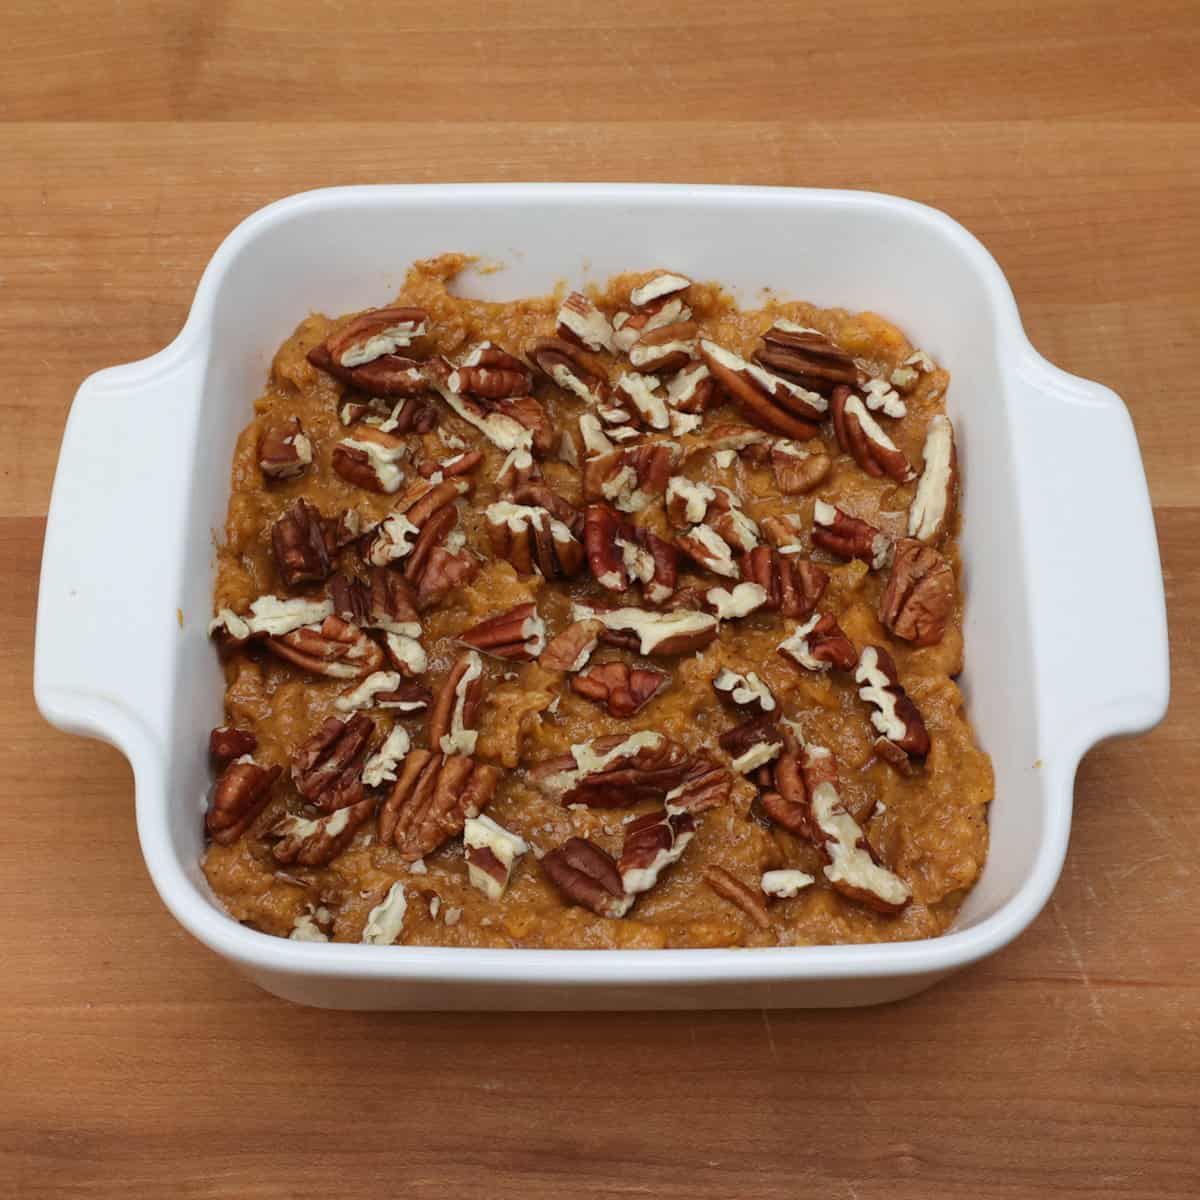 an unbaked sweet potato casserole topped with pecans on a wooden counter.